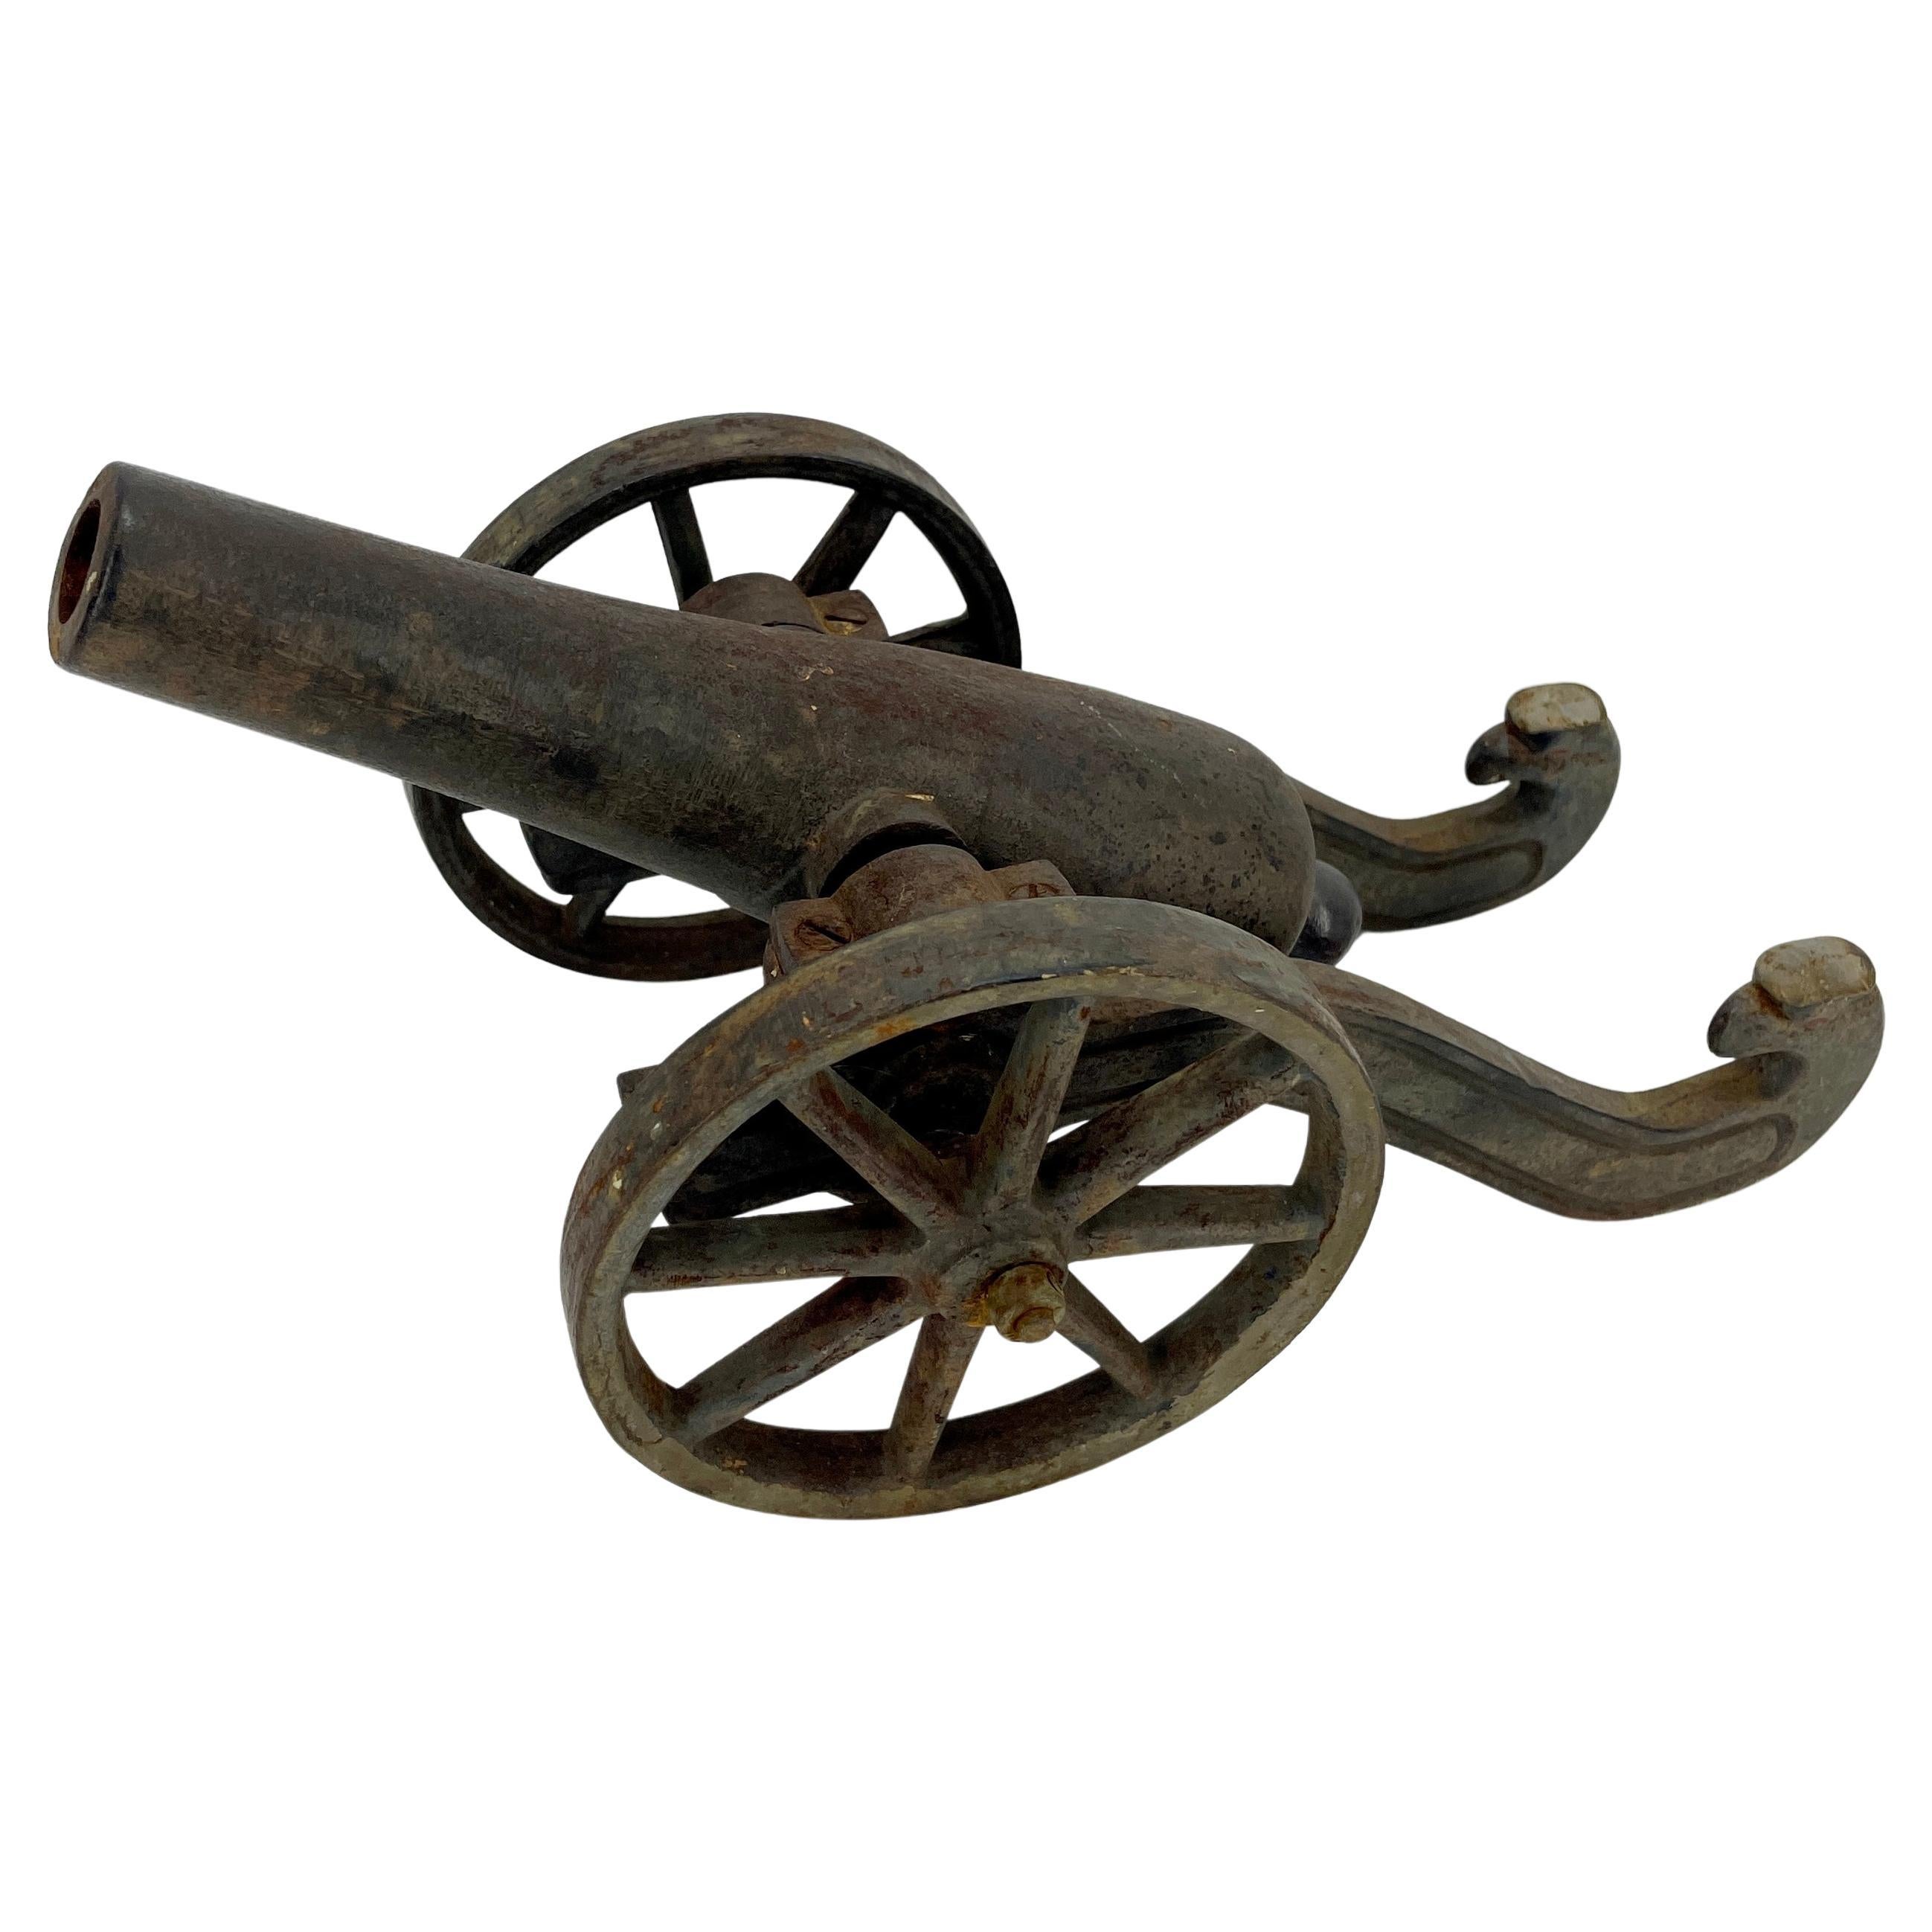 Small Early 20th Century Iron Cannon Desk Accessory with Eagle-Head Decoration For Sale 4